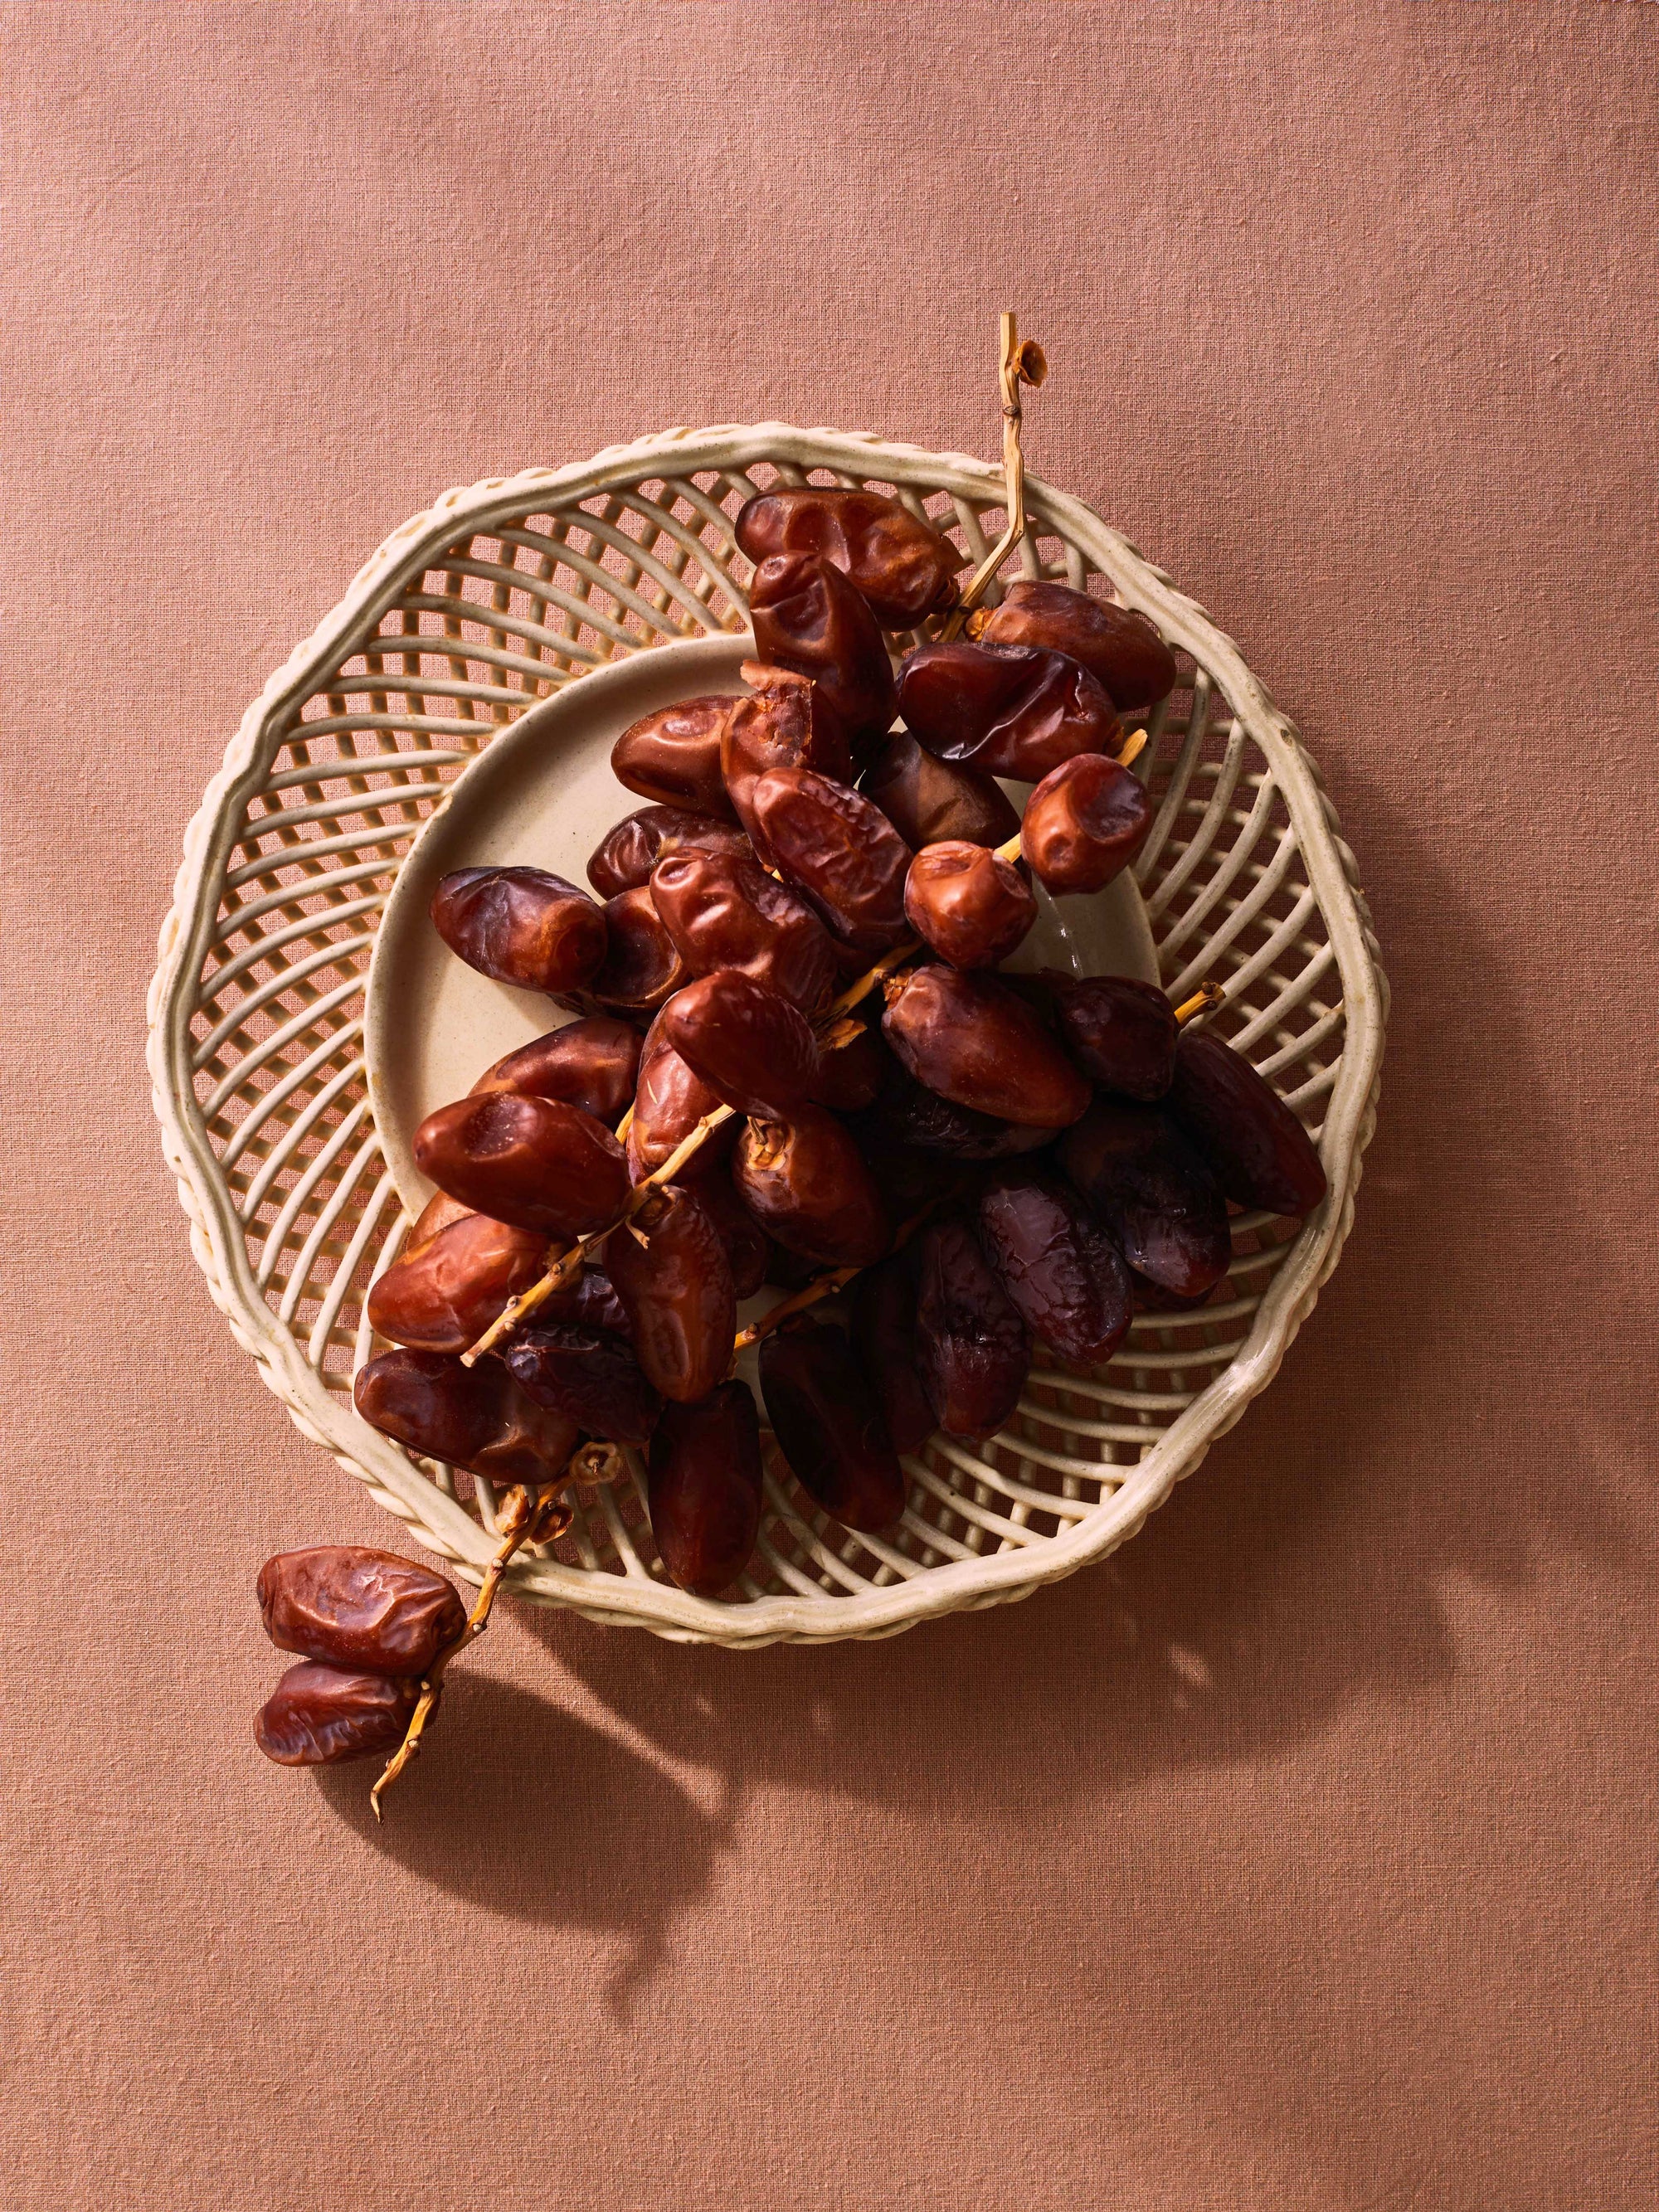 Shot with an overhead view, a peach linen tablecloth is the backdrop a white lattice porcelain plate filled with an overflowing bunch of dates, still on the branch. Warm light comes from the upper left, casting a moody shadow on the bottom right of the image, indicating evening.